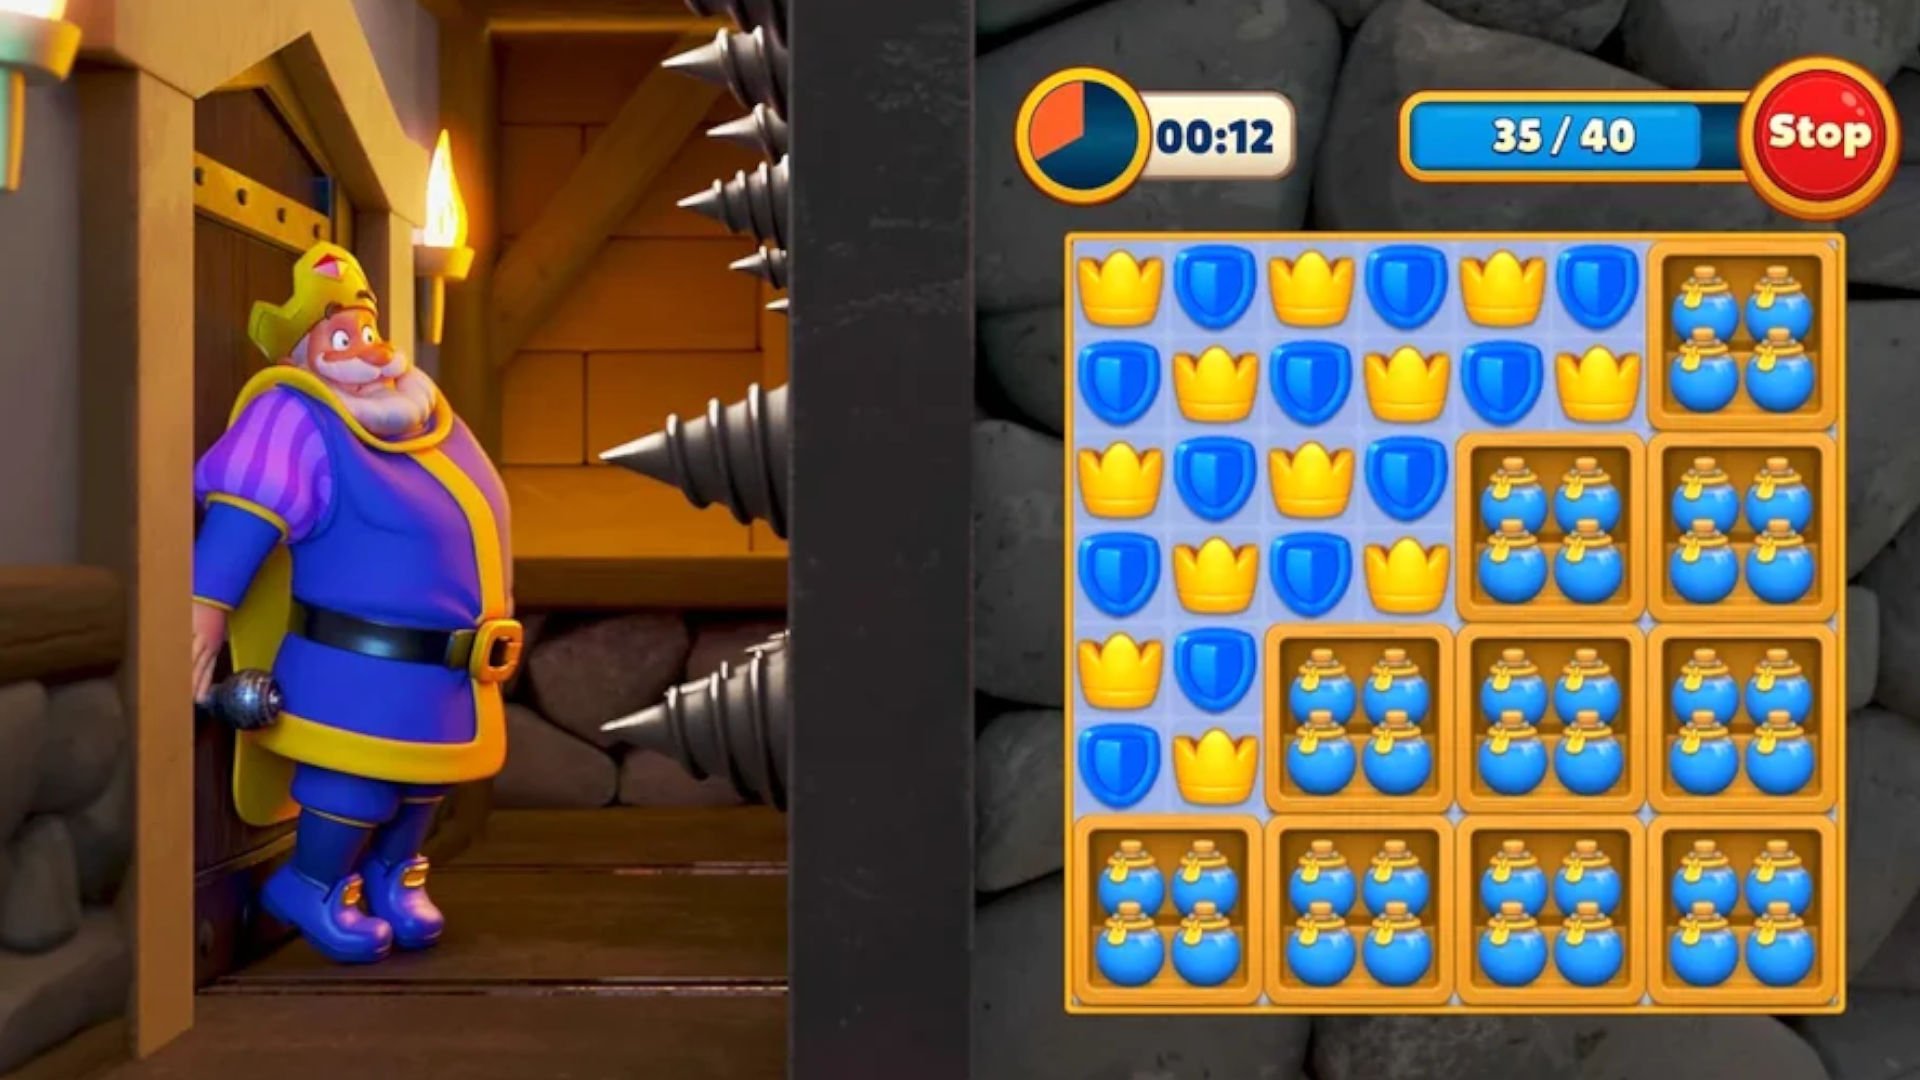 Royal match kings nightmare puzzle solution gameplay 